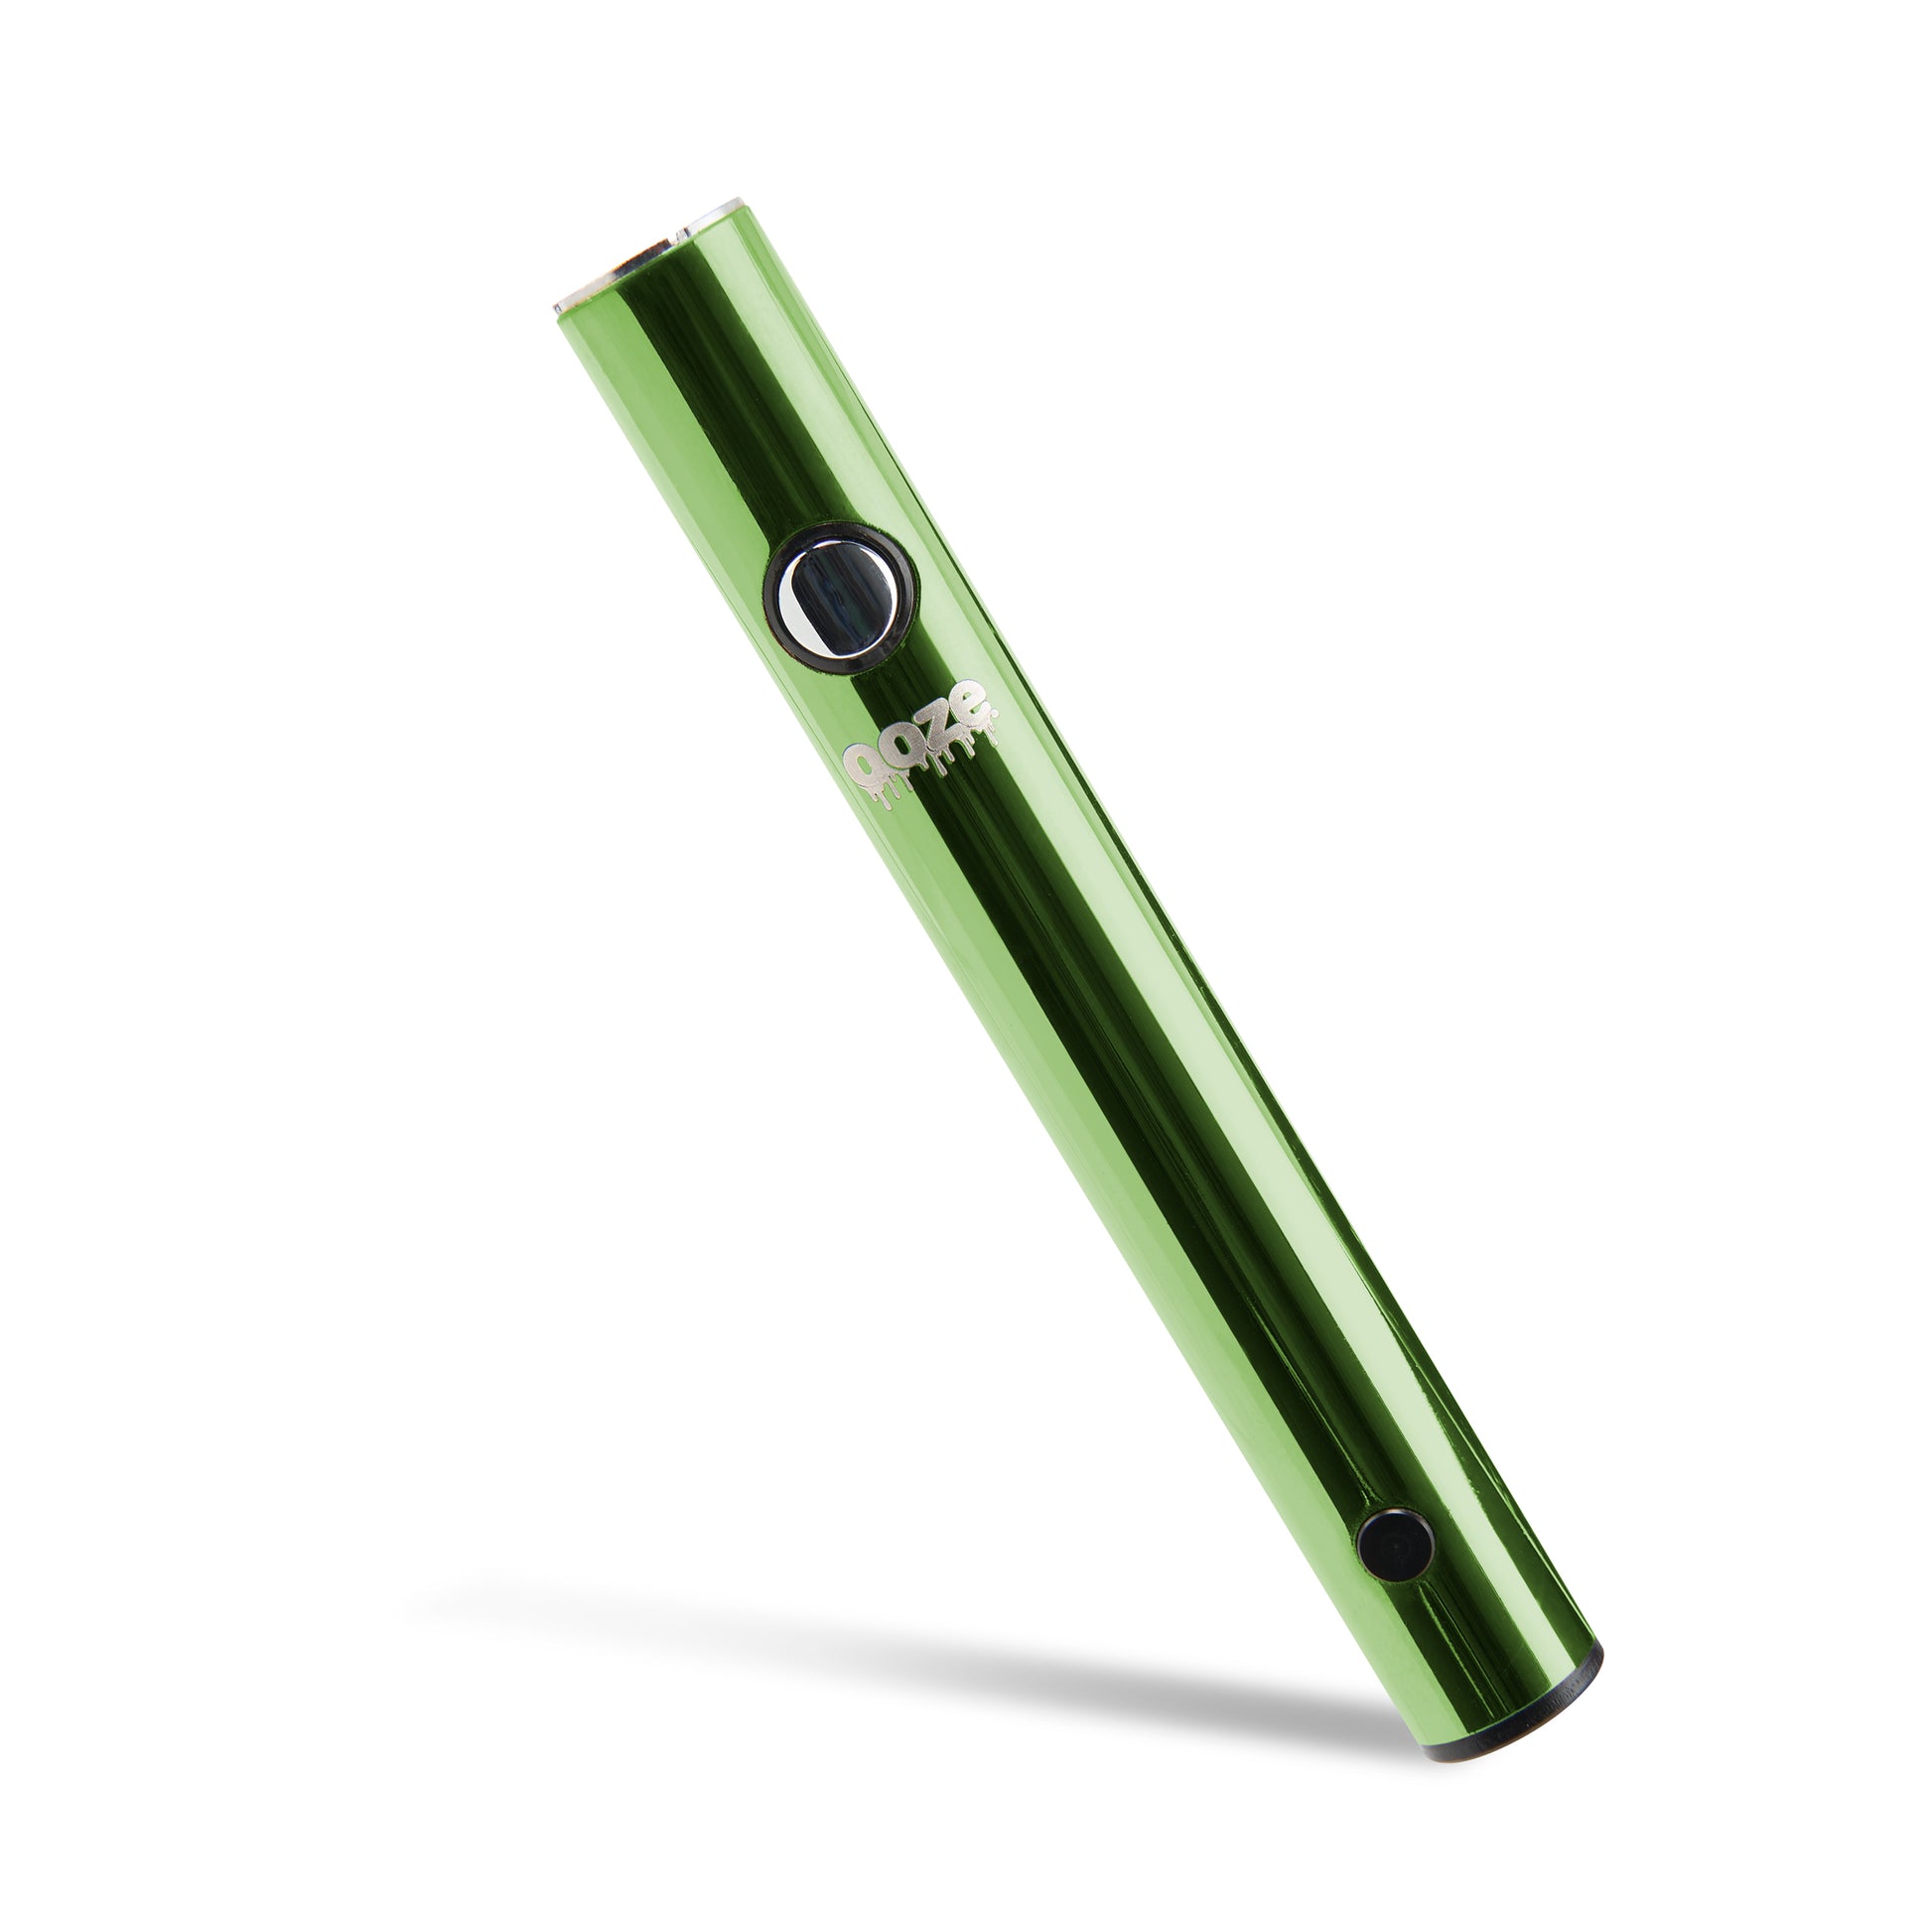 The green Ooze Wink LED vape battery is leaning at a 45 degree angle